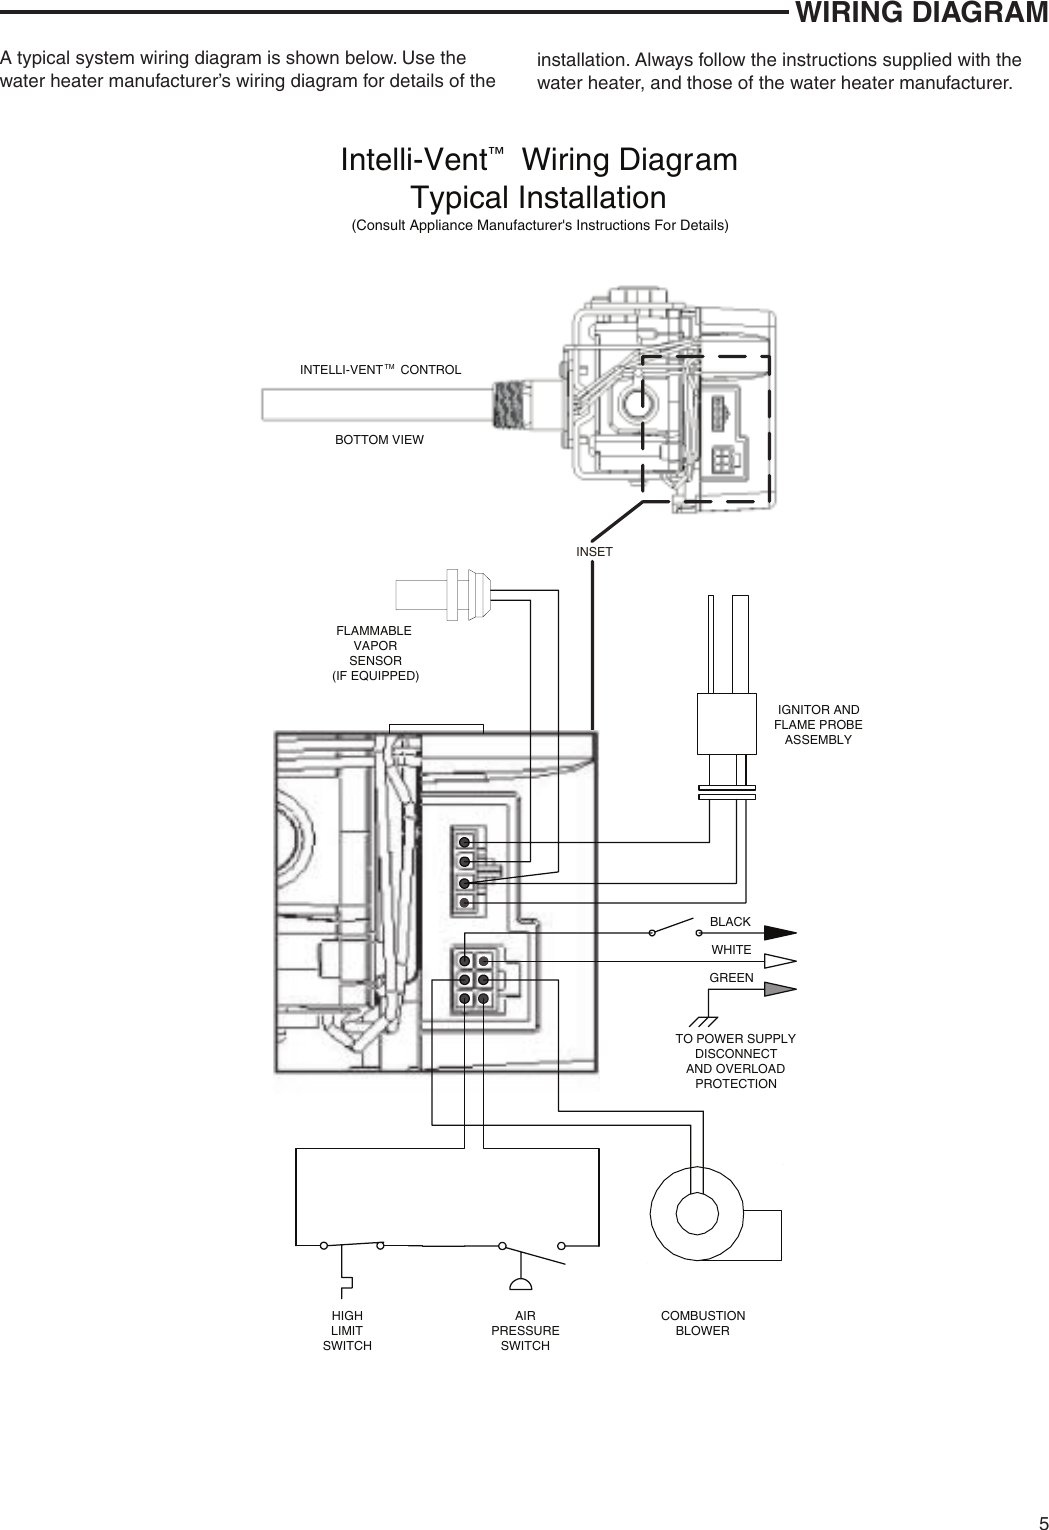 Page 5 of 8 - White-Rodgers White-Rodgers-37E73A-903-Intelli-Vent-Control-For-Power-Vented-Water-Heaters-Installation-Instructions- 37E73A-903_Intellivent_37-7109A  White-rodgers-37e73a-903-intelli-vent-control-for-power-vented-water-heaters-installation-instructions